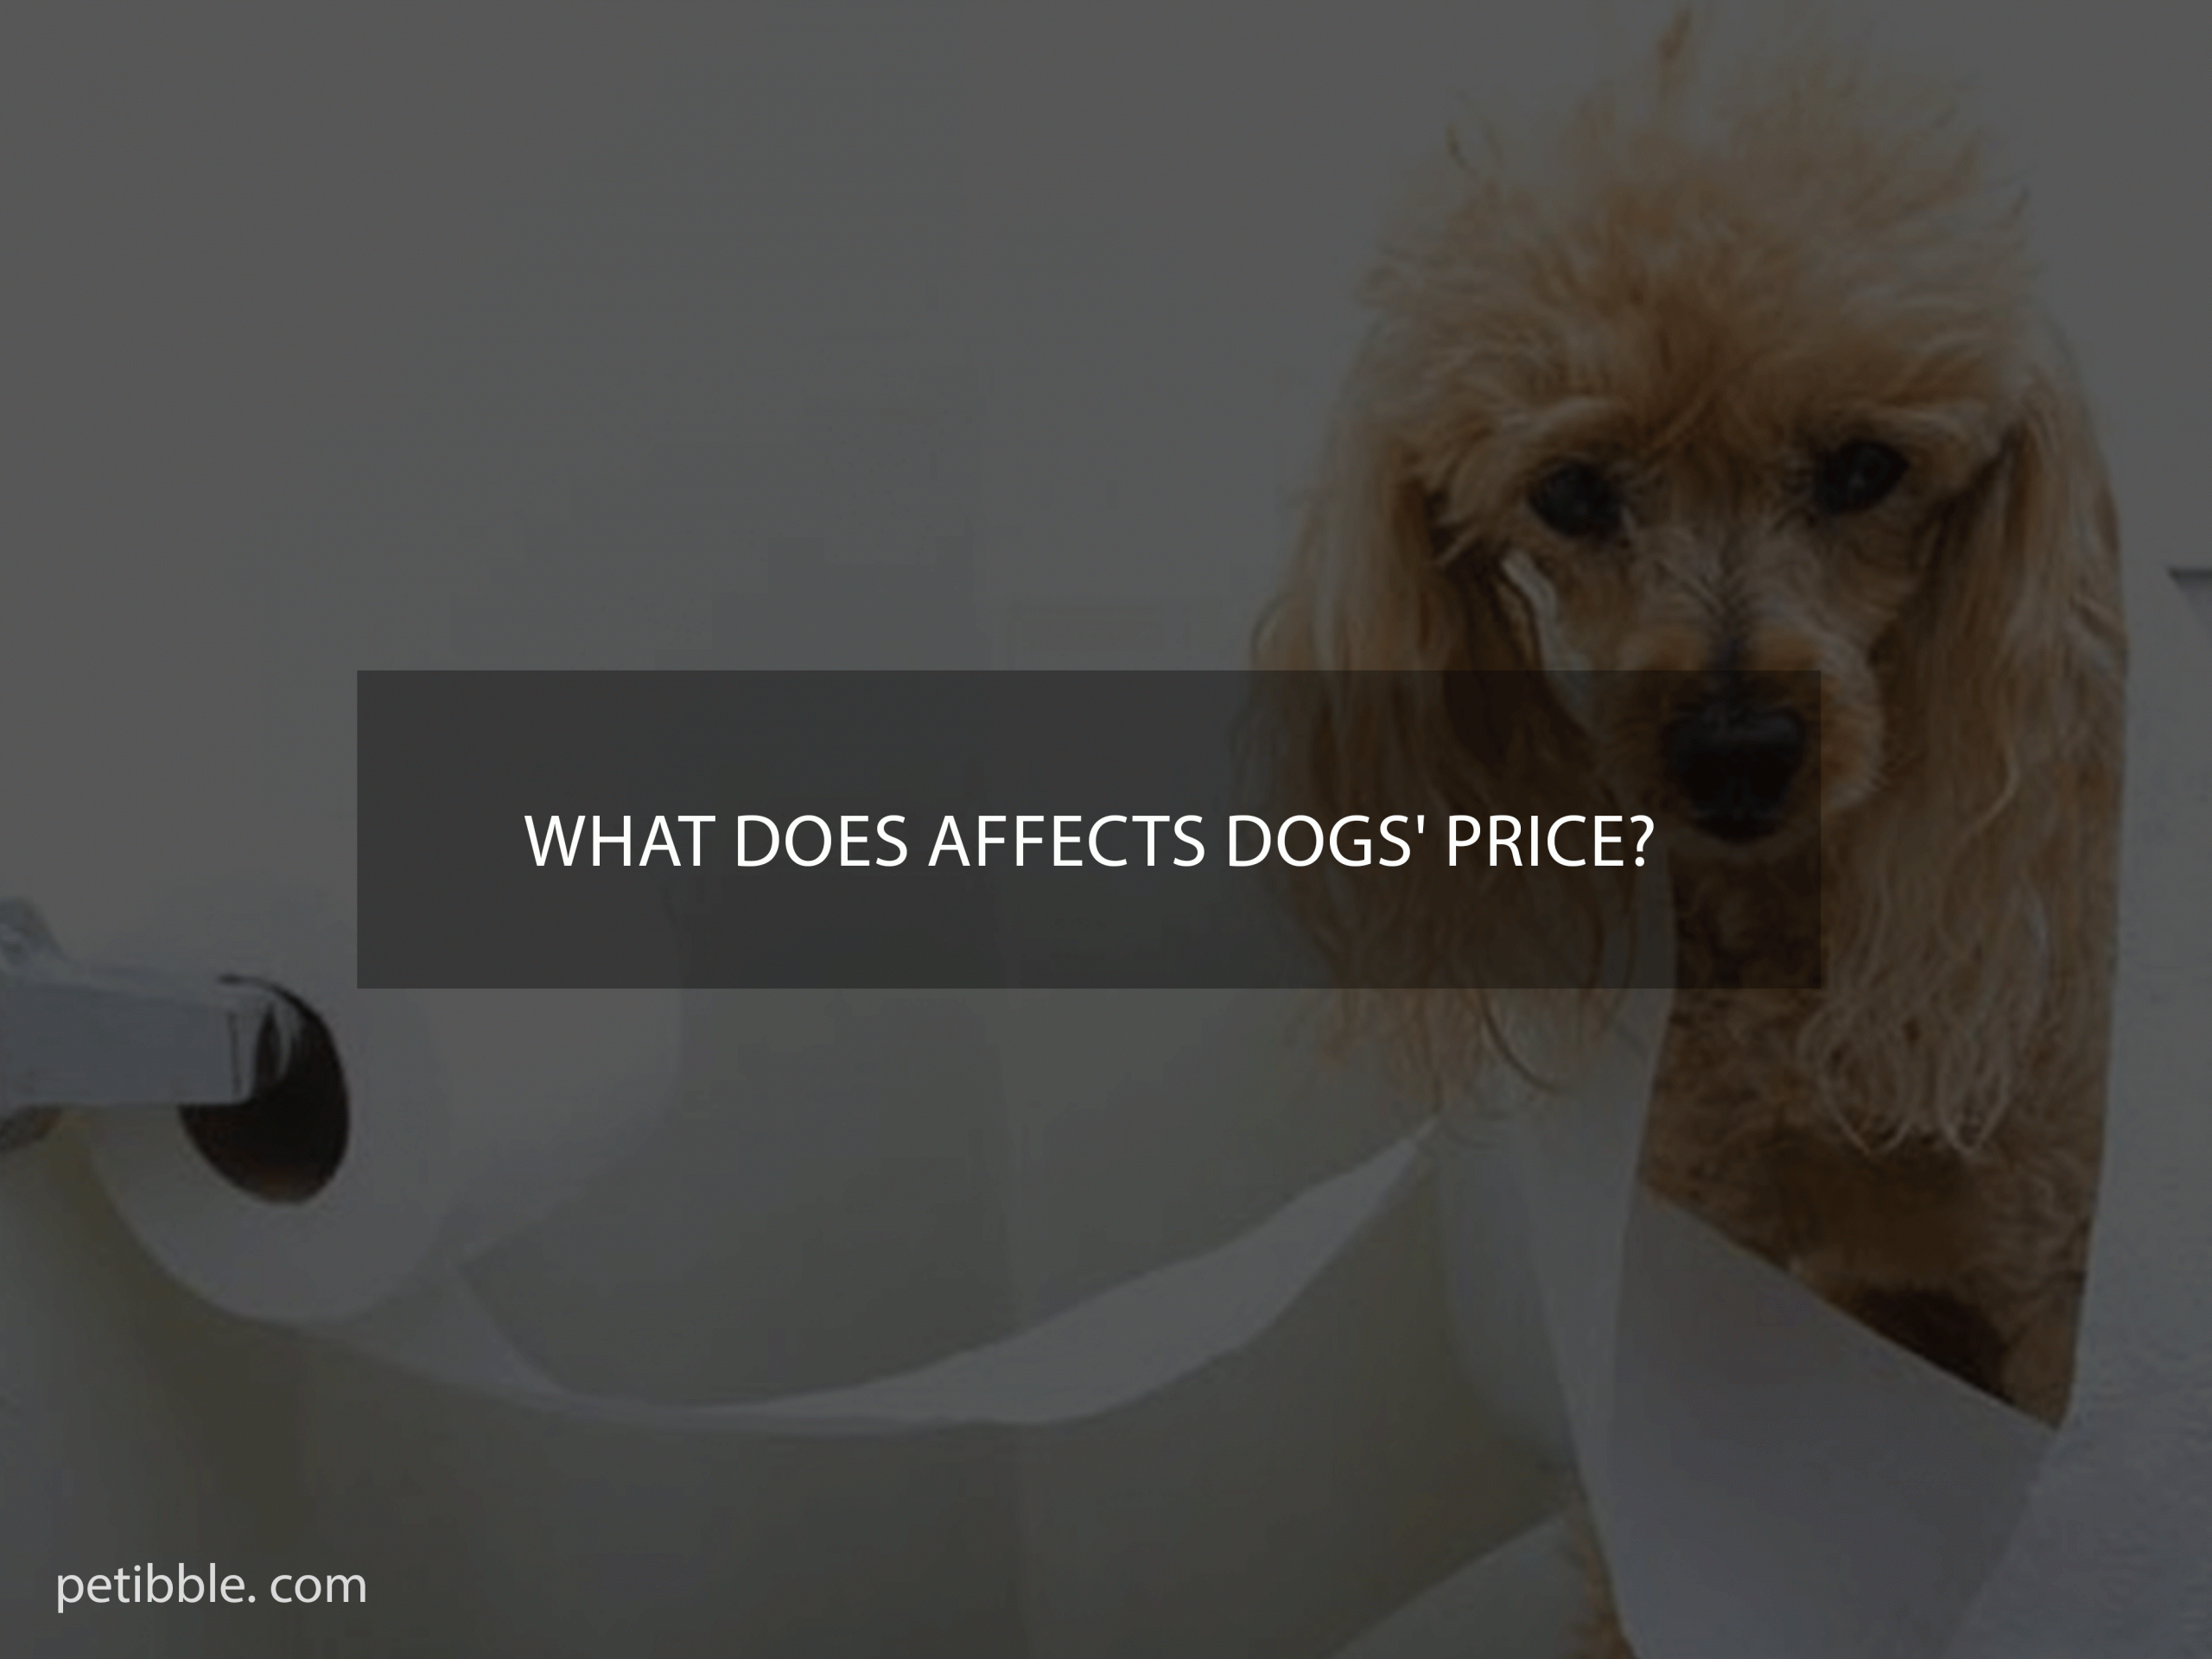 what affects the price of dogs?